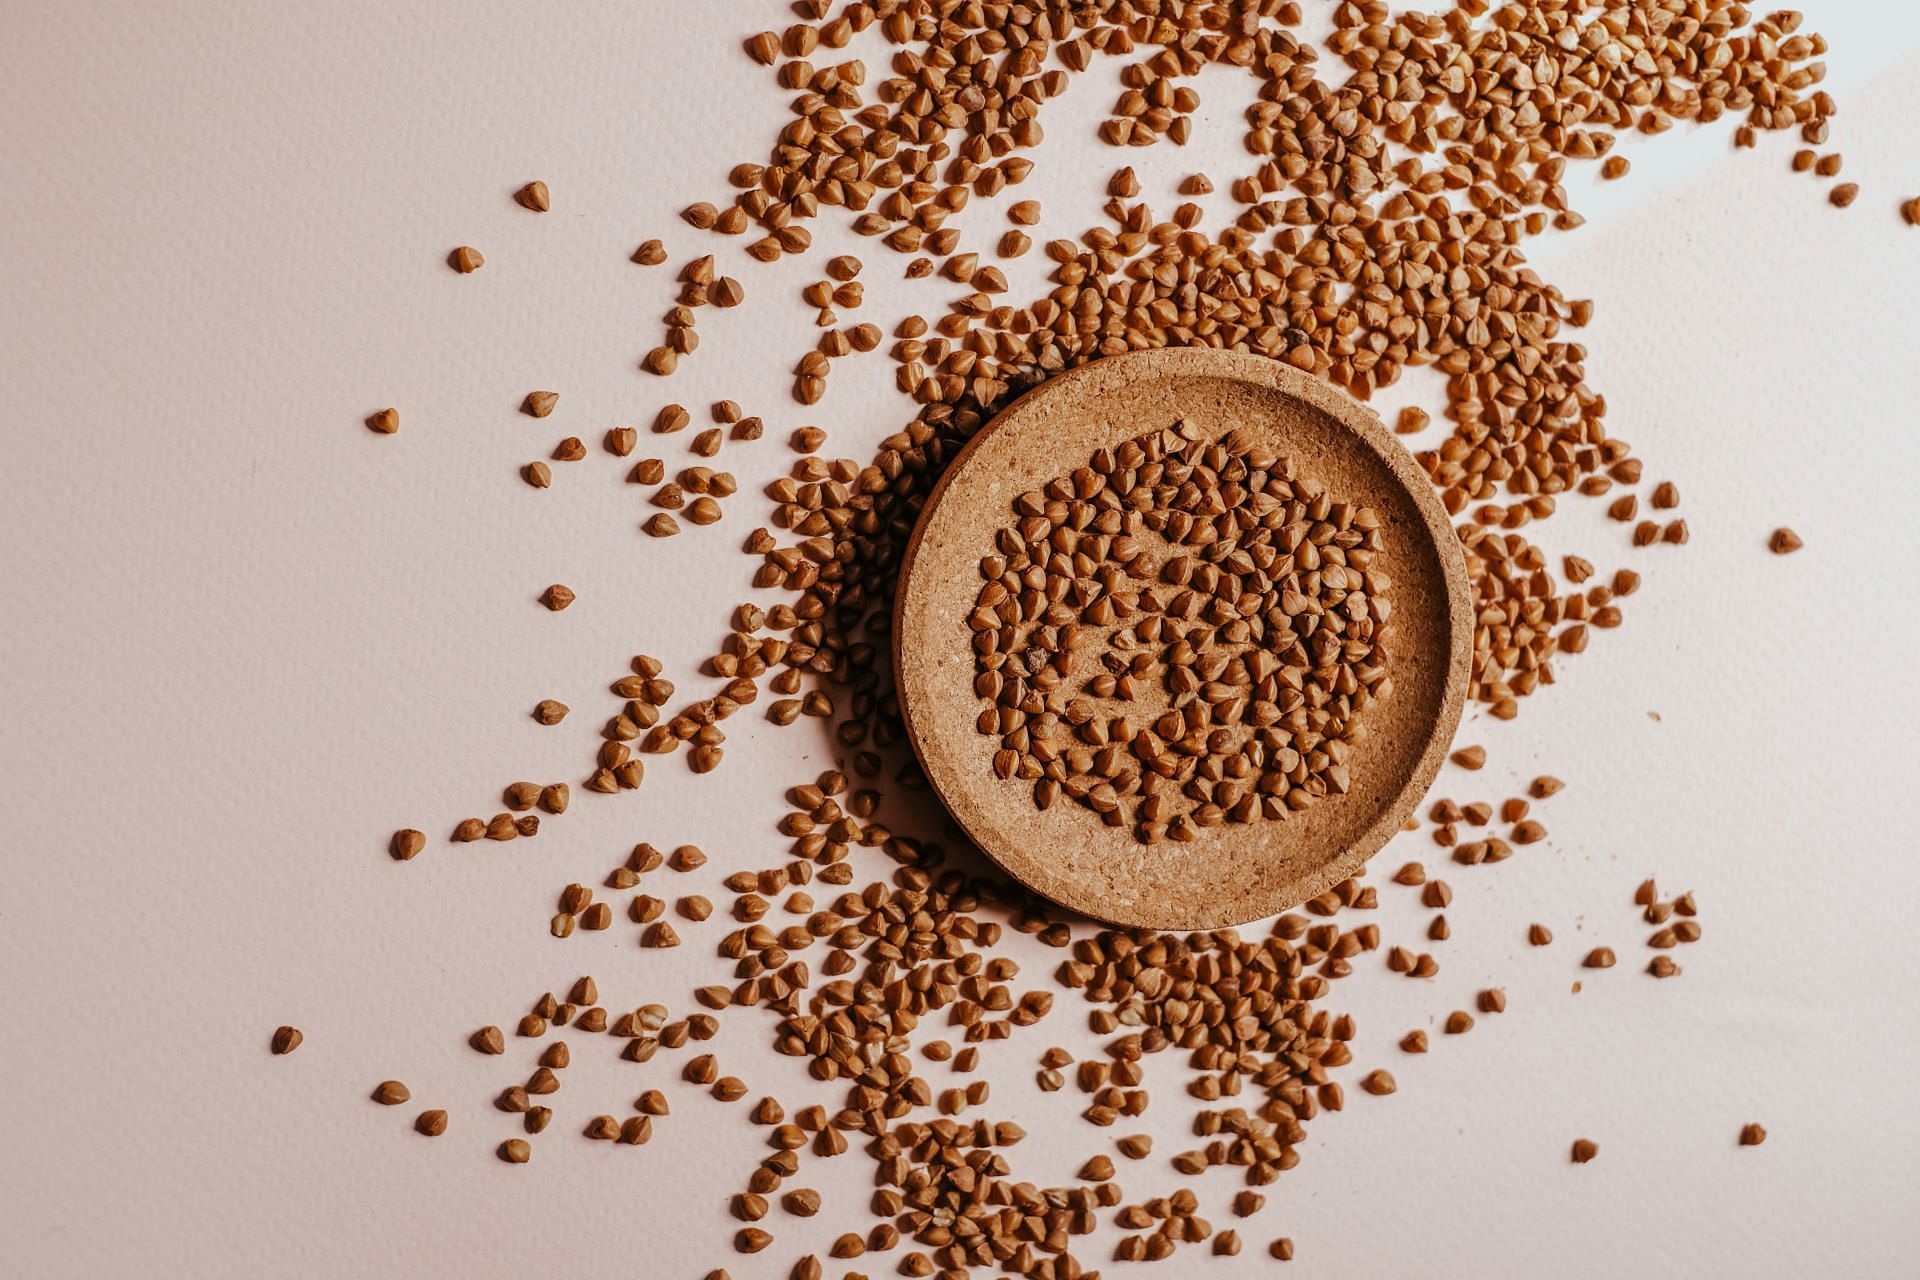 Due to its low Glycemic Index, good fiber content and soluble sugar D-chiro-inositol, buckwheat is excellent for those looking to control their blood sugar (Image via Pexels @Vie Studio)